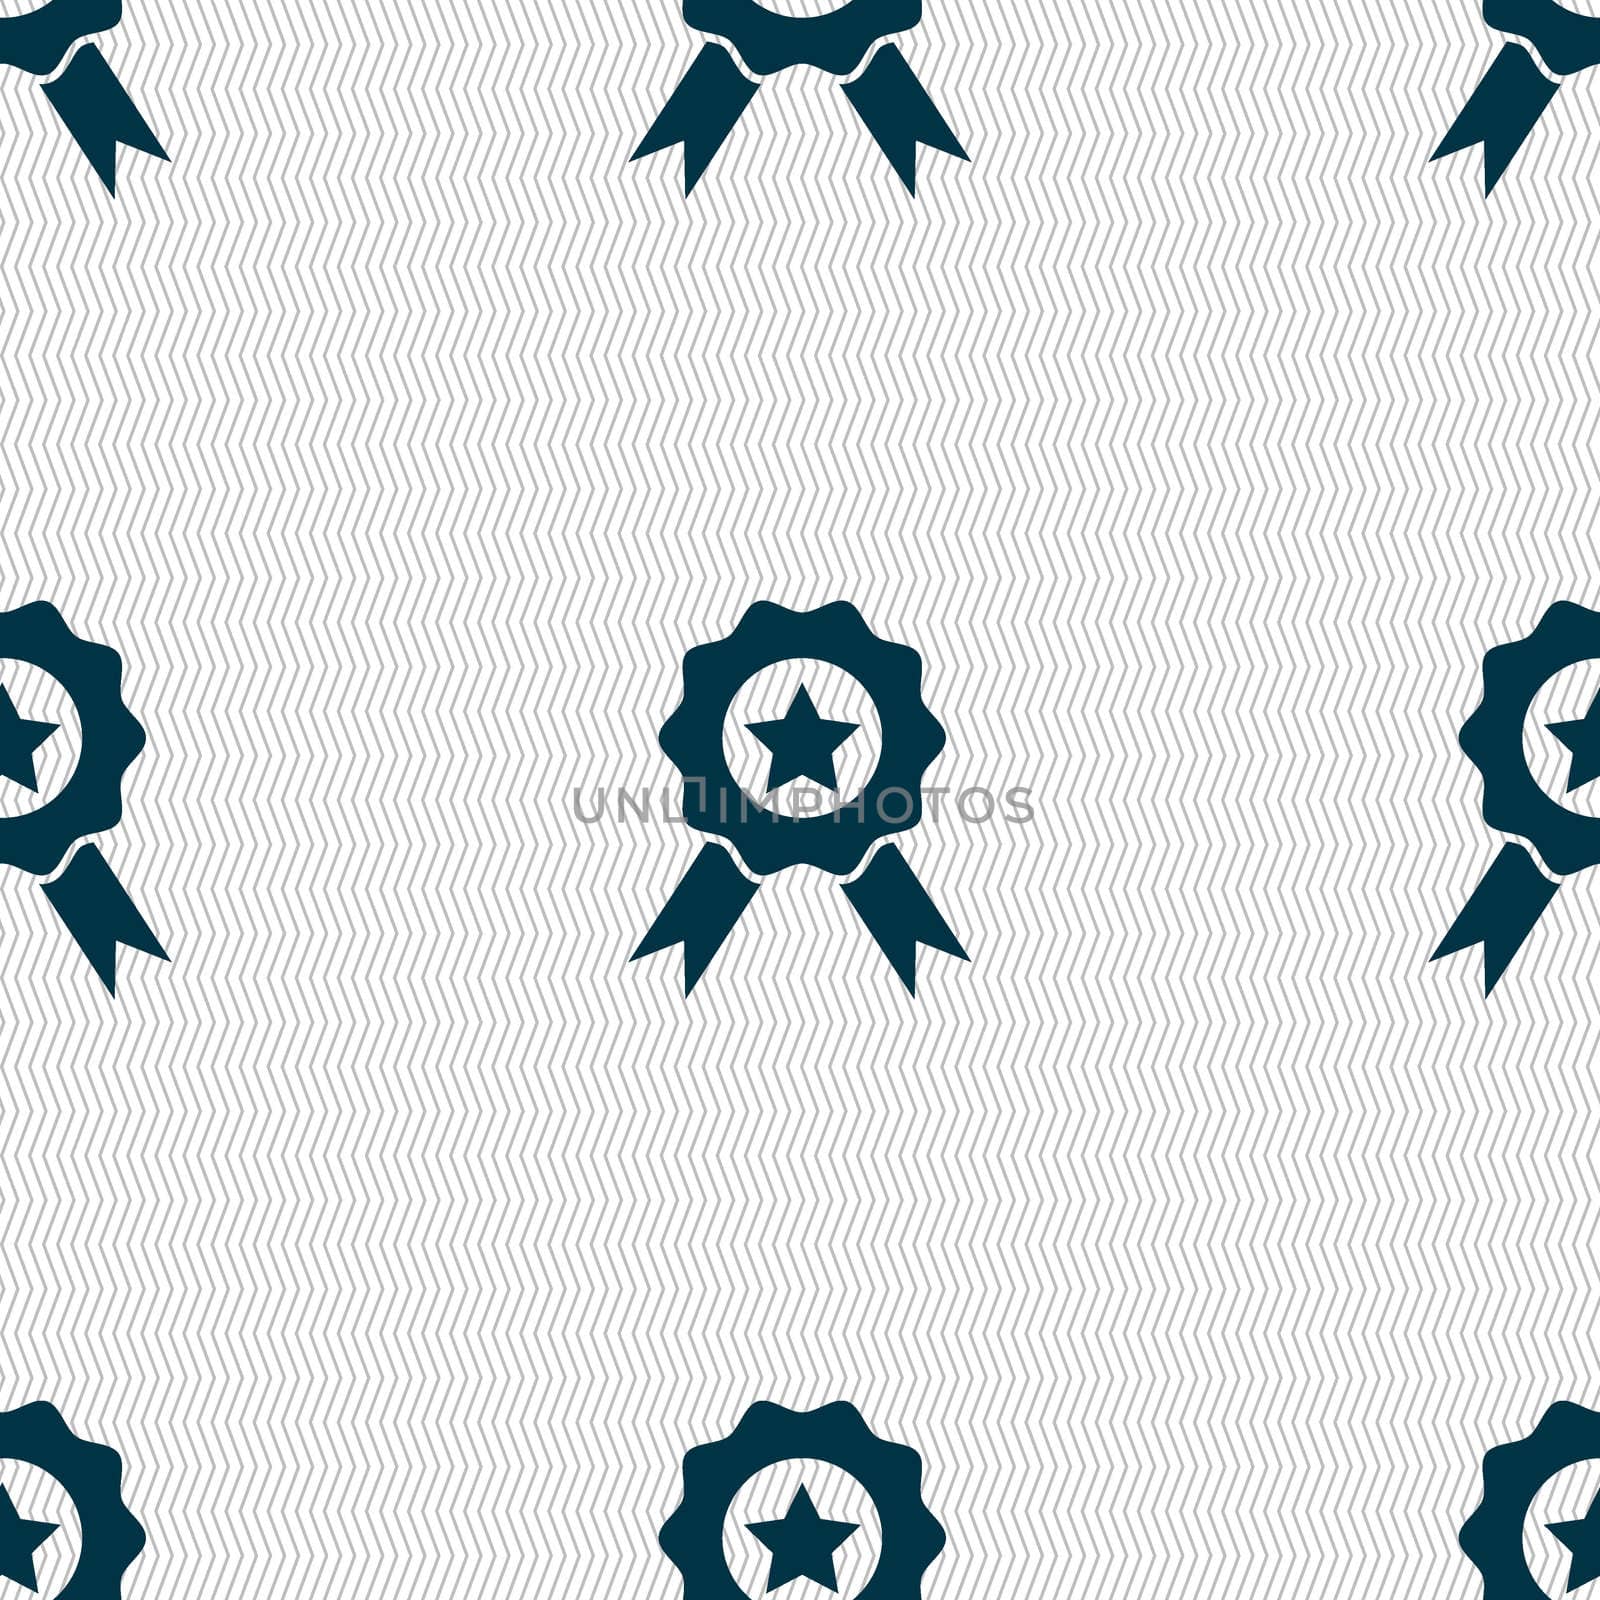 Award, Medal of Honor icon sign. Seamless abstract background with geometric shapes. illustration